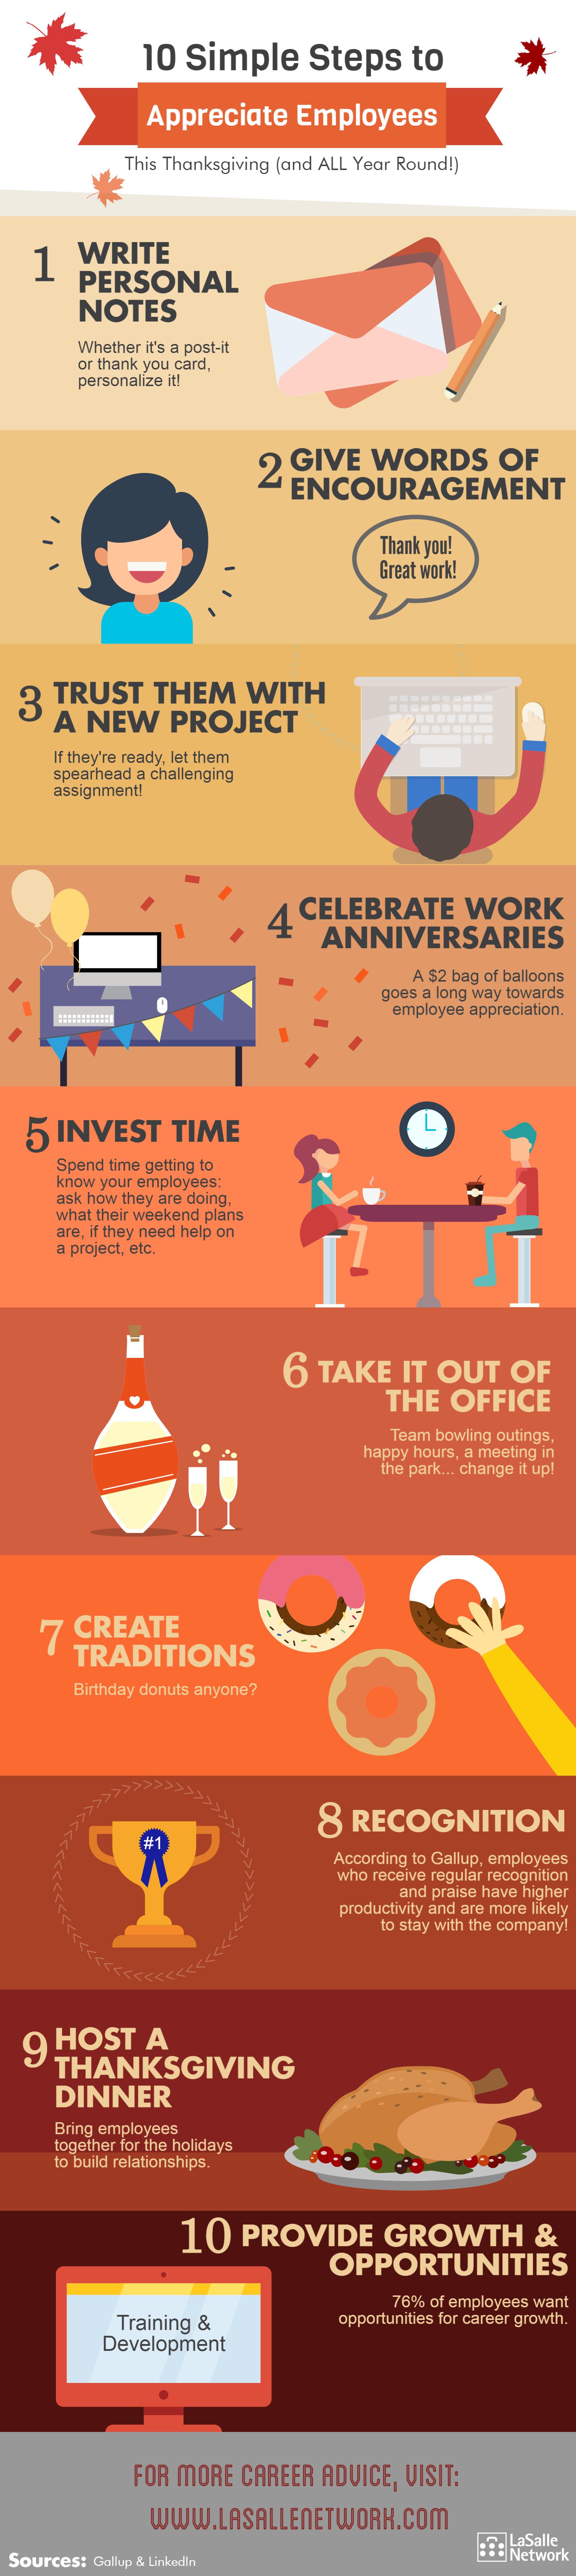 10-Simple-Simple-Steps-to-Appreciate-Employees-This-Thanksgiving